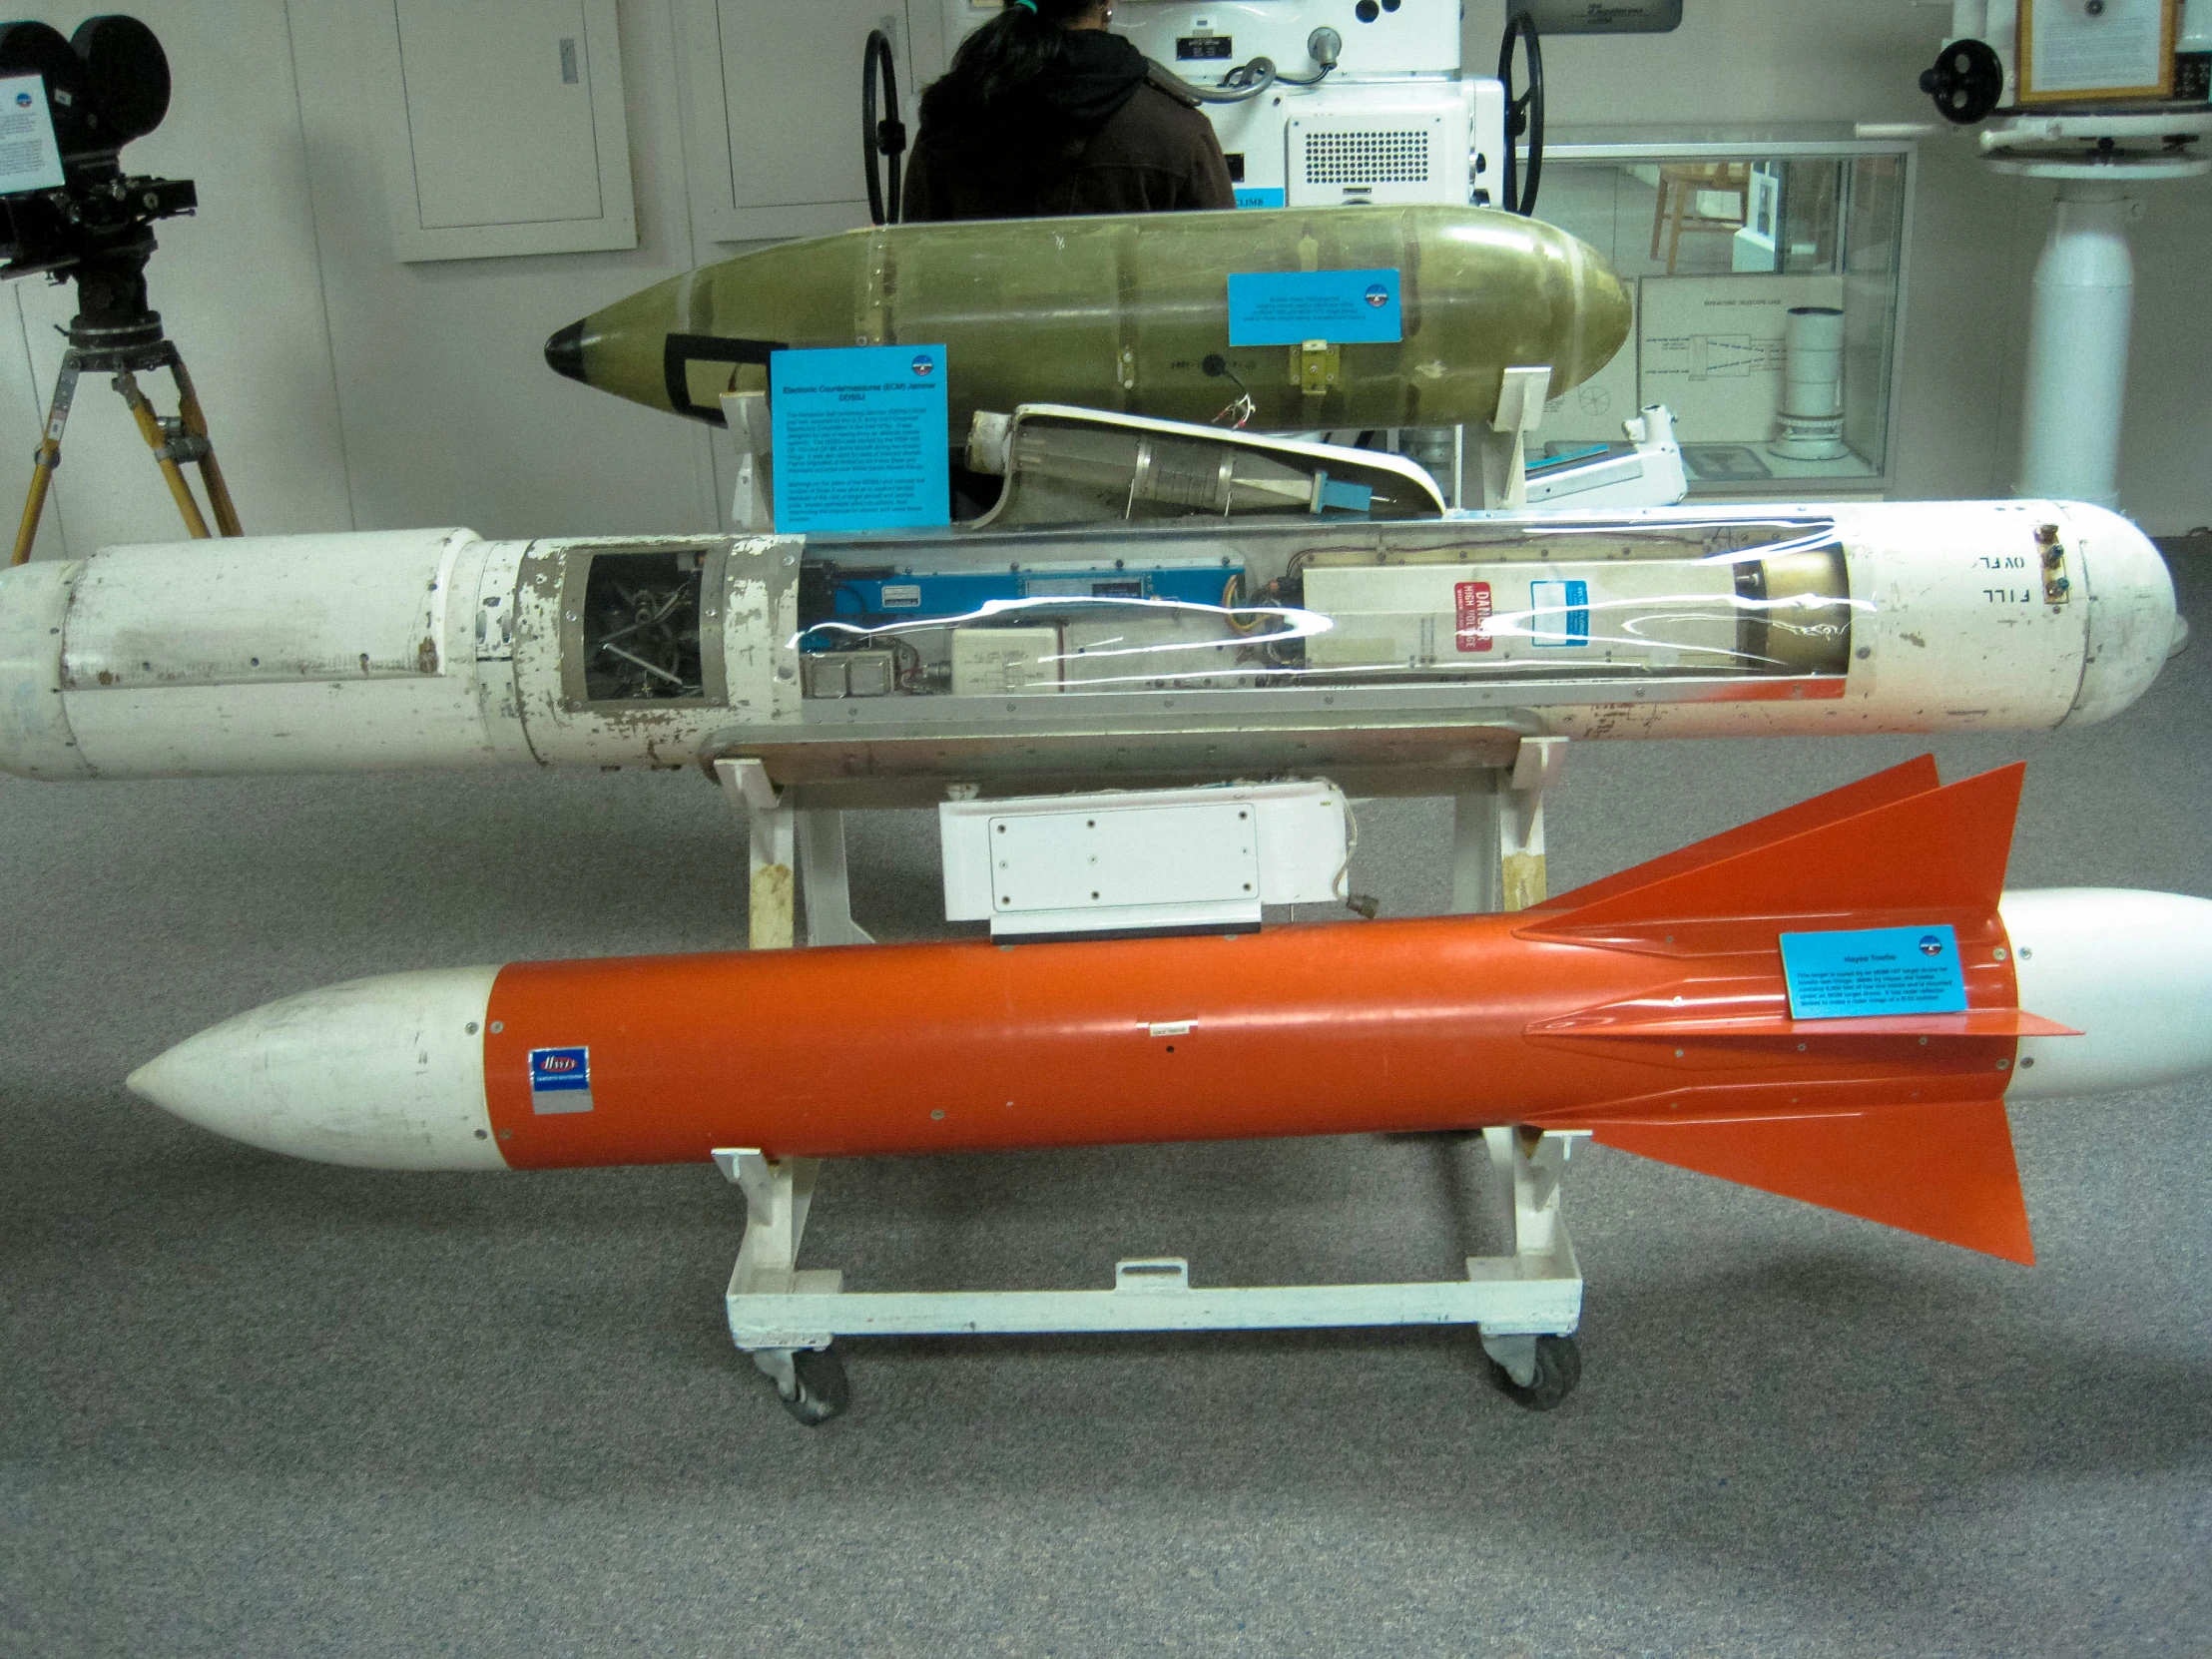 a close up of two missiles with other items around them